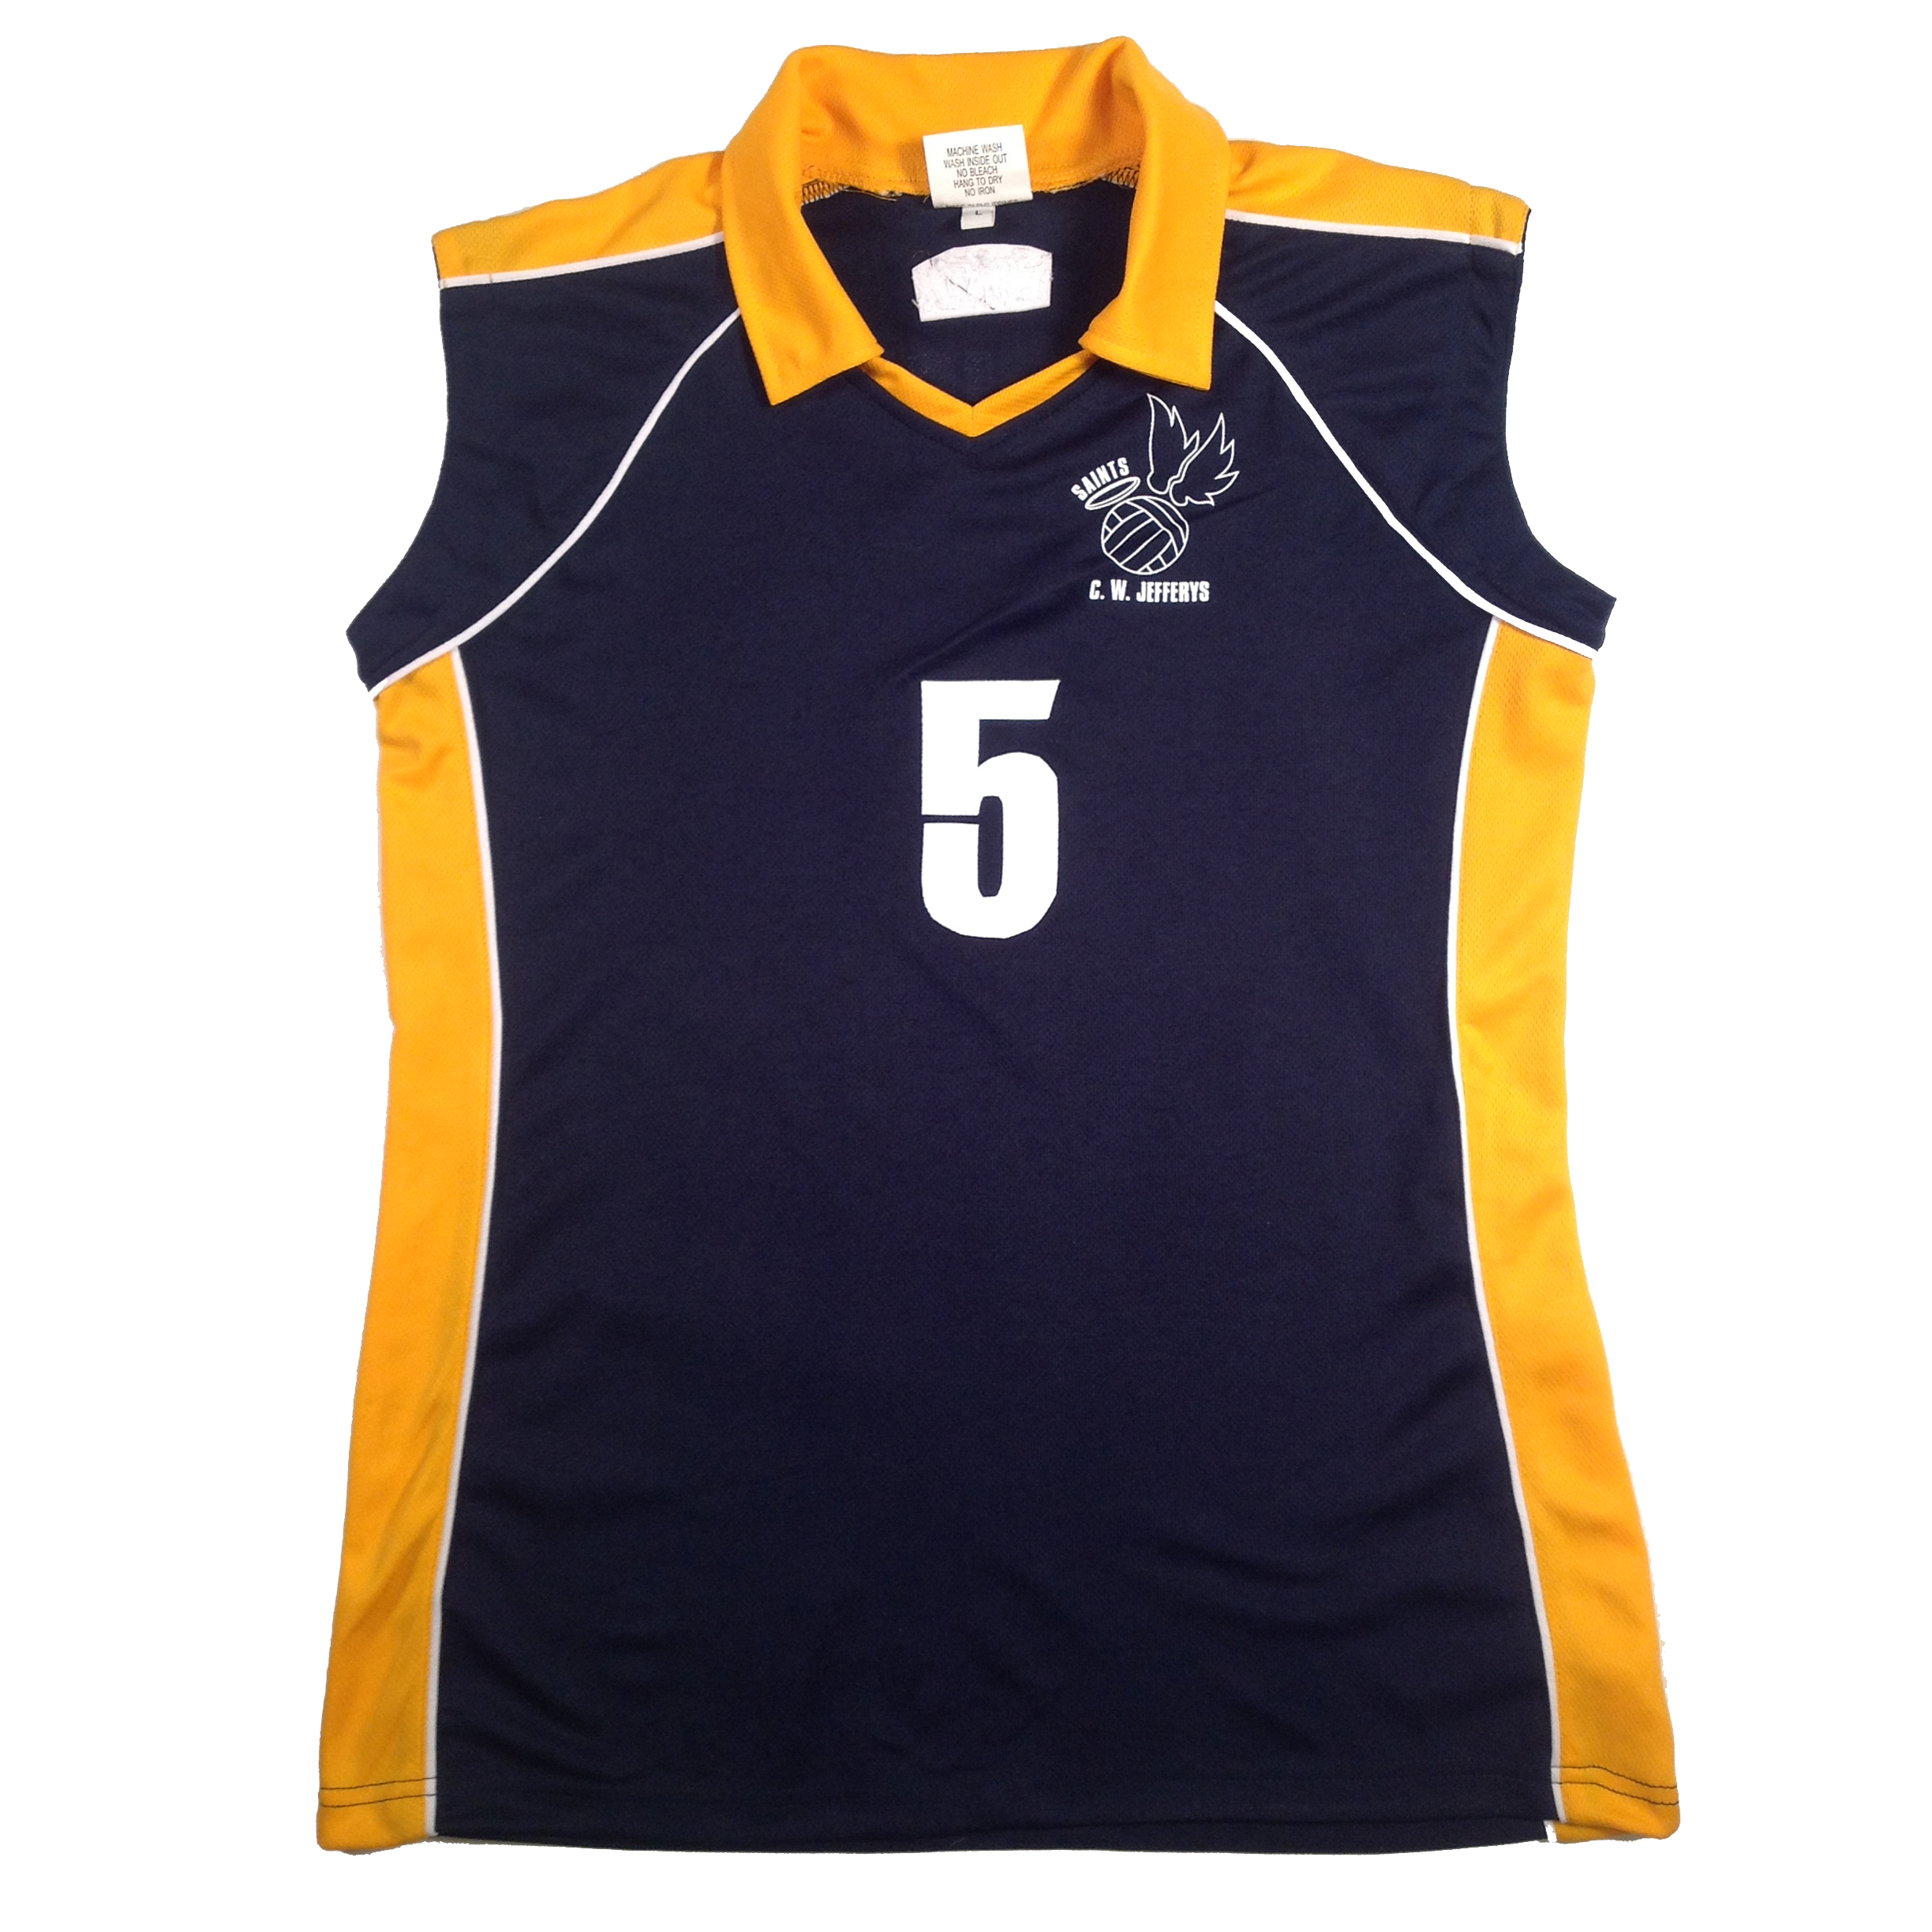 best jersey design for volleyball